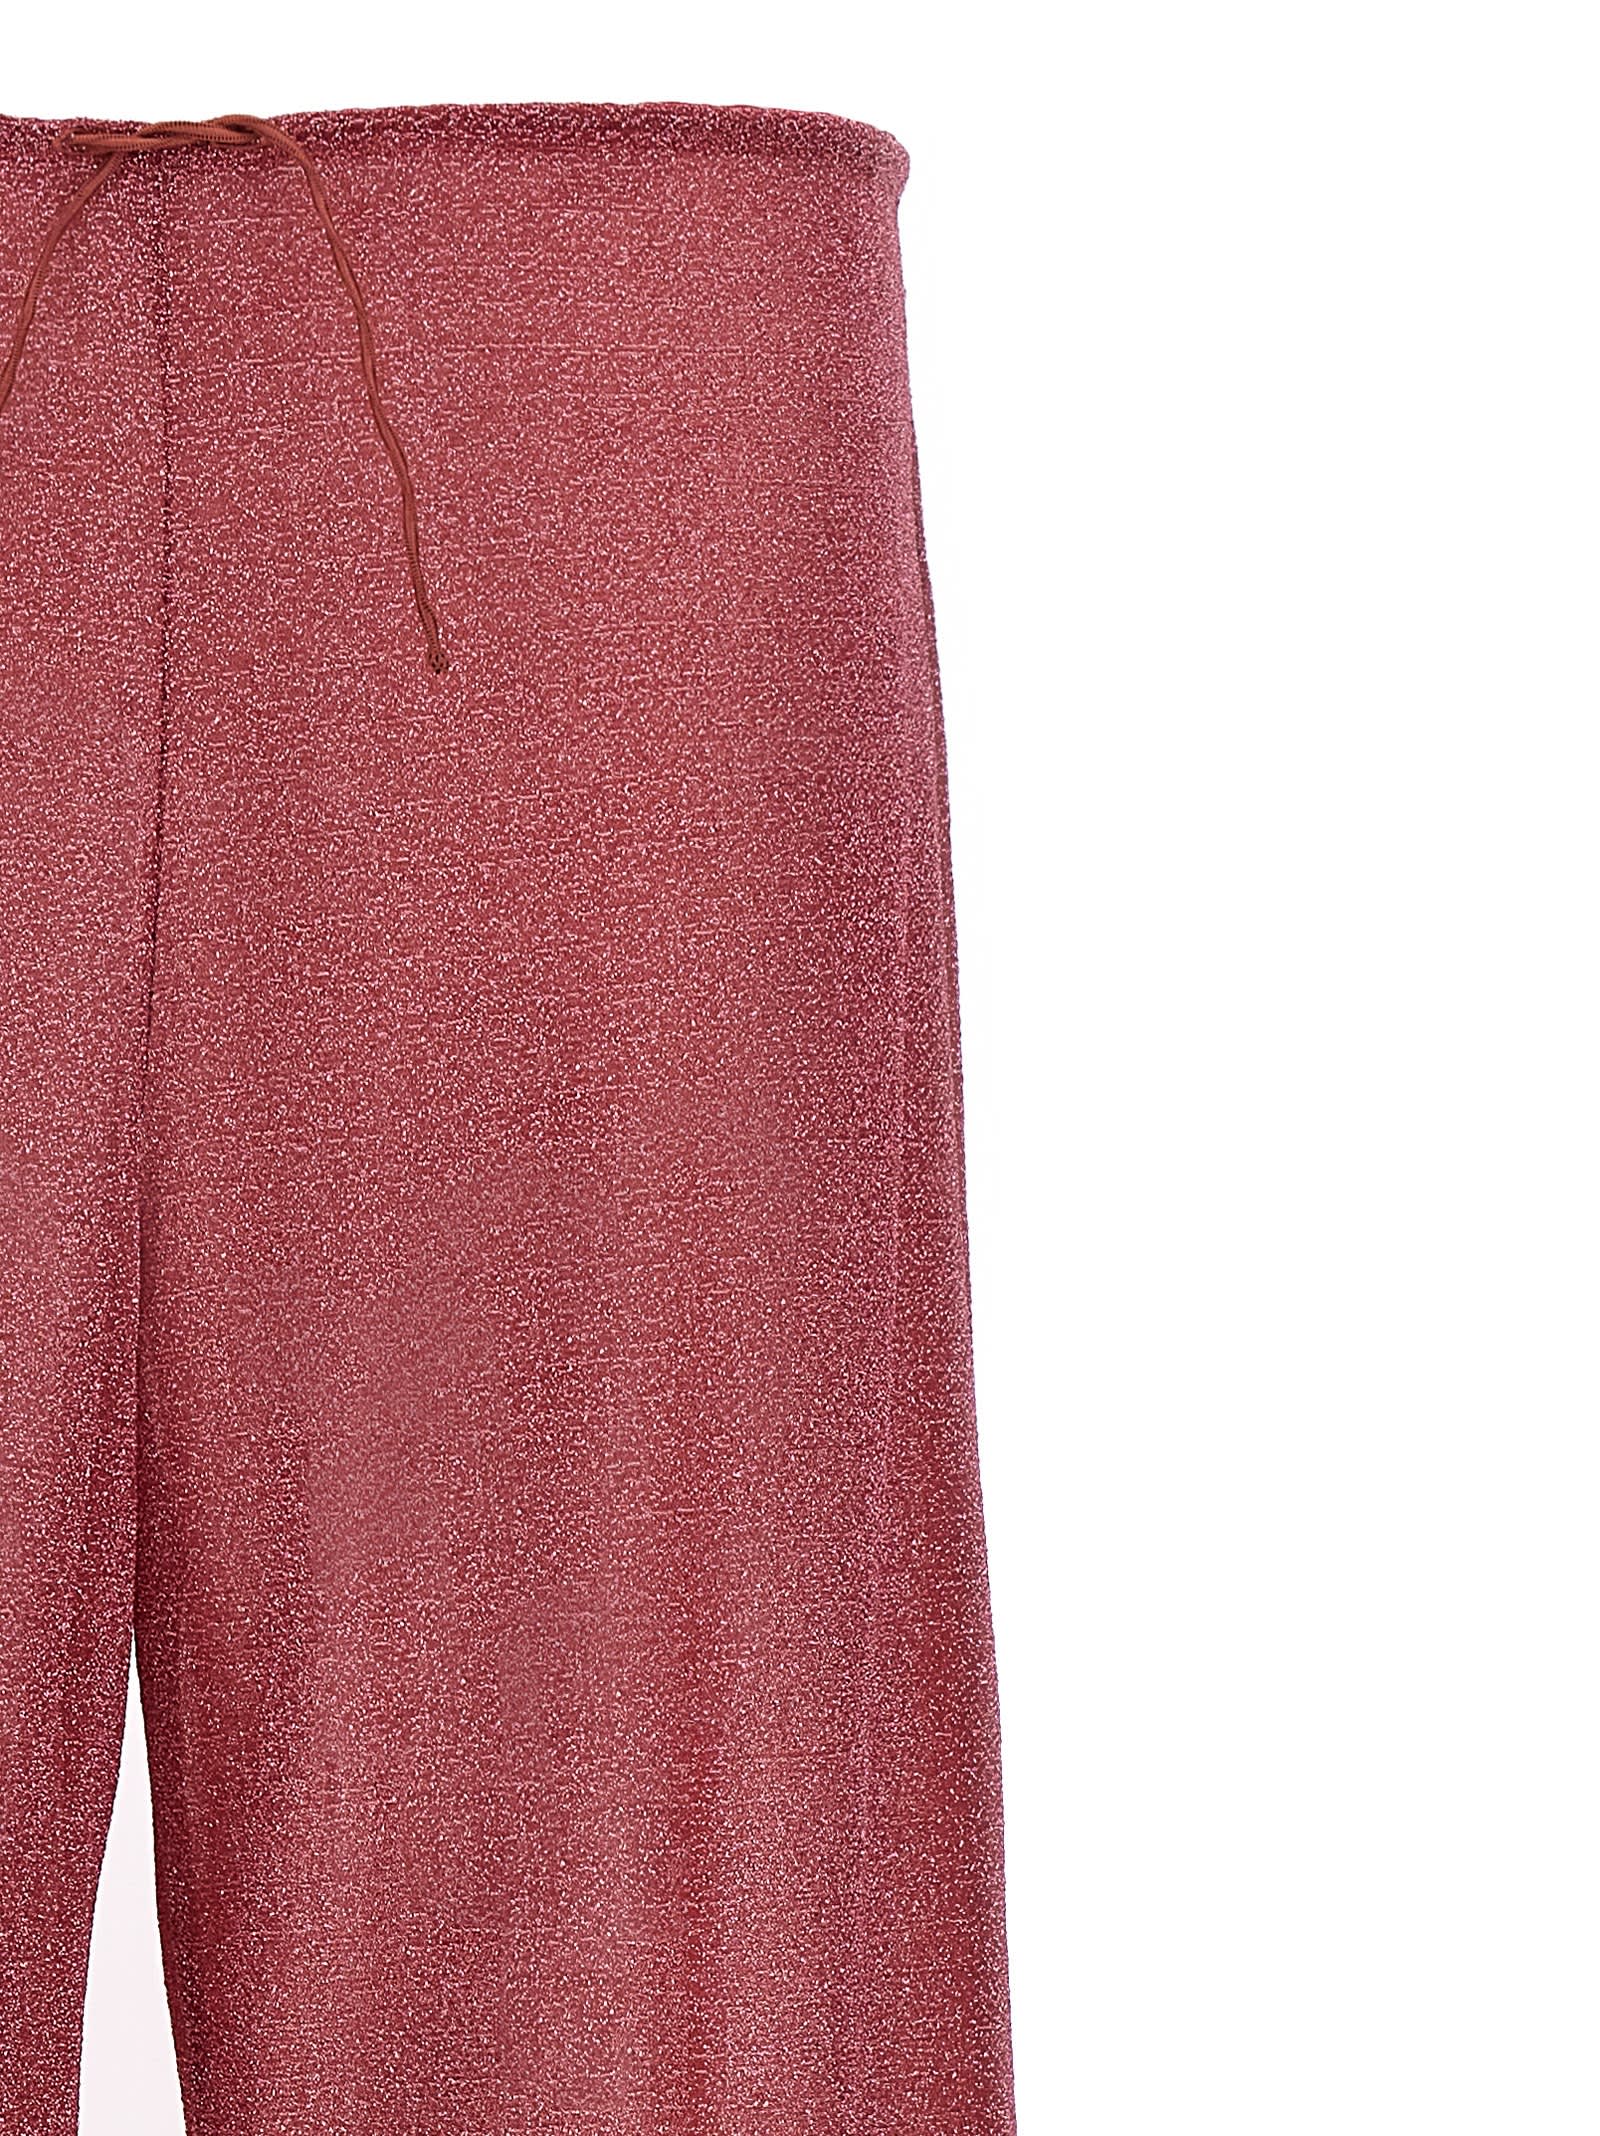 Shop Oseree Lumiere Plumage Pants In Raspberry